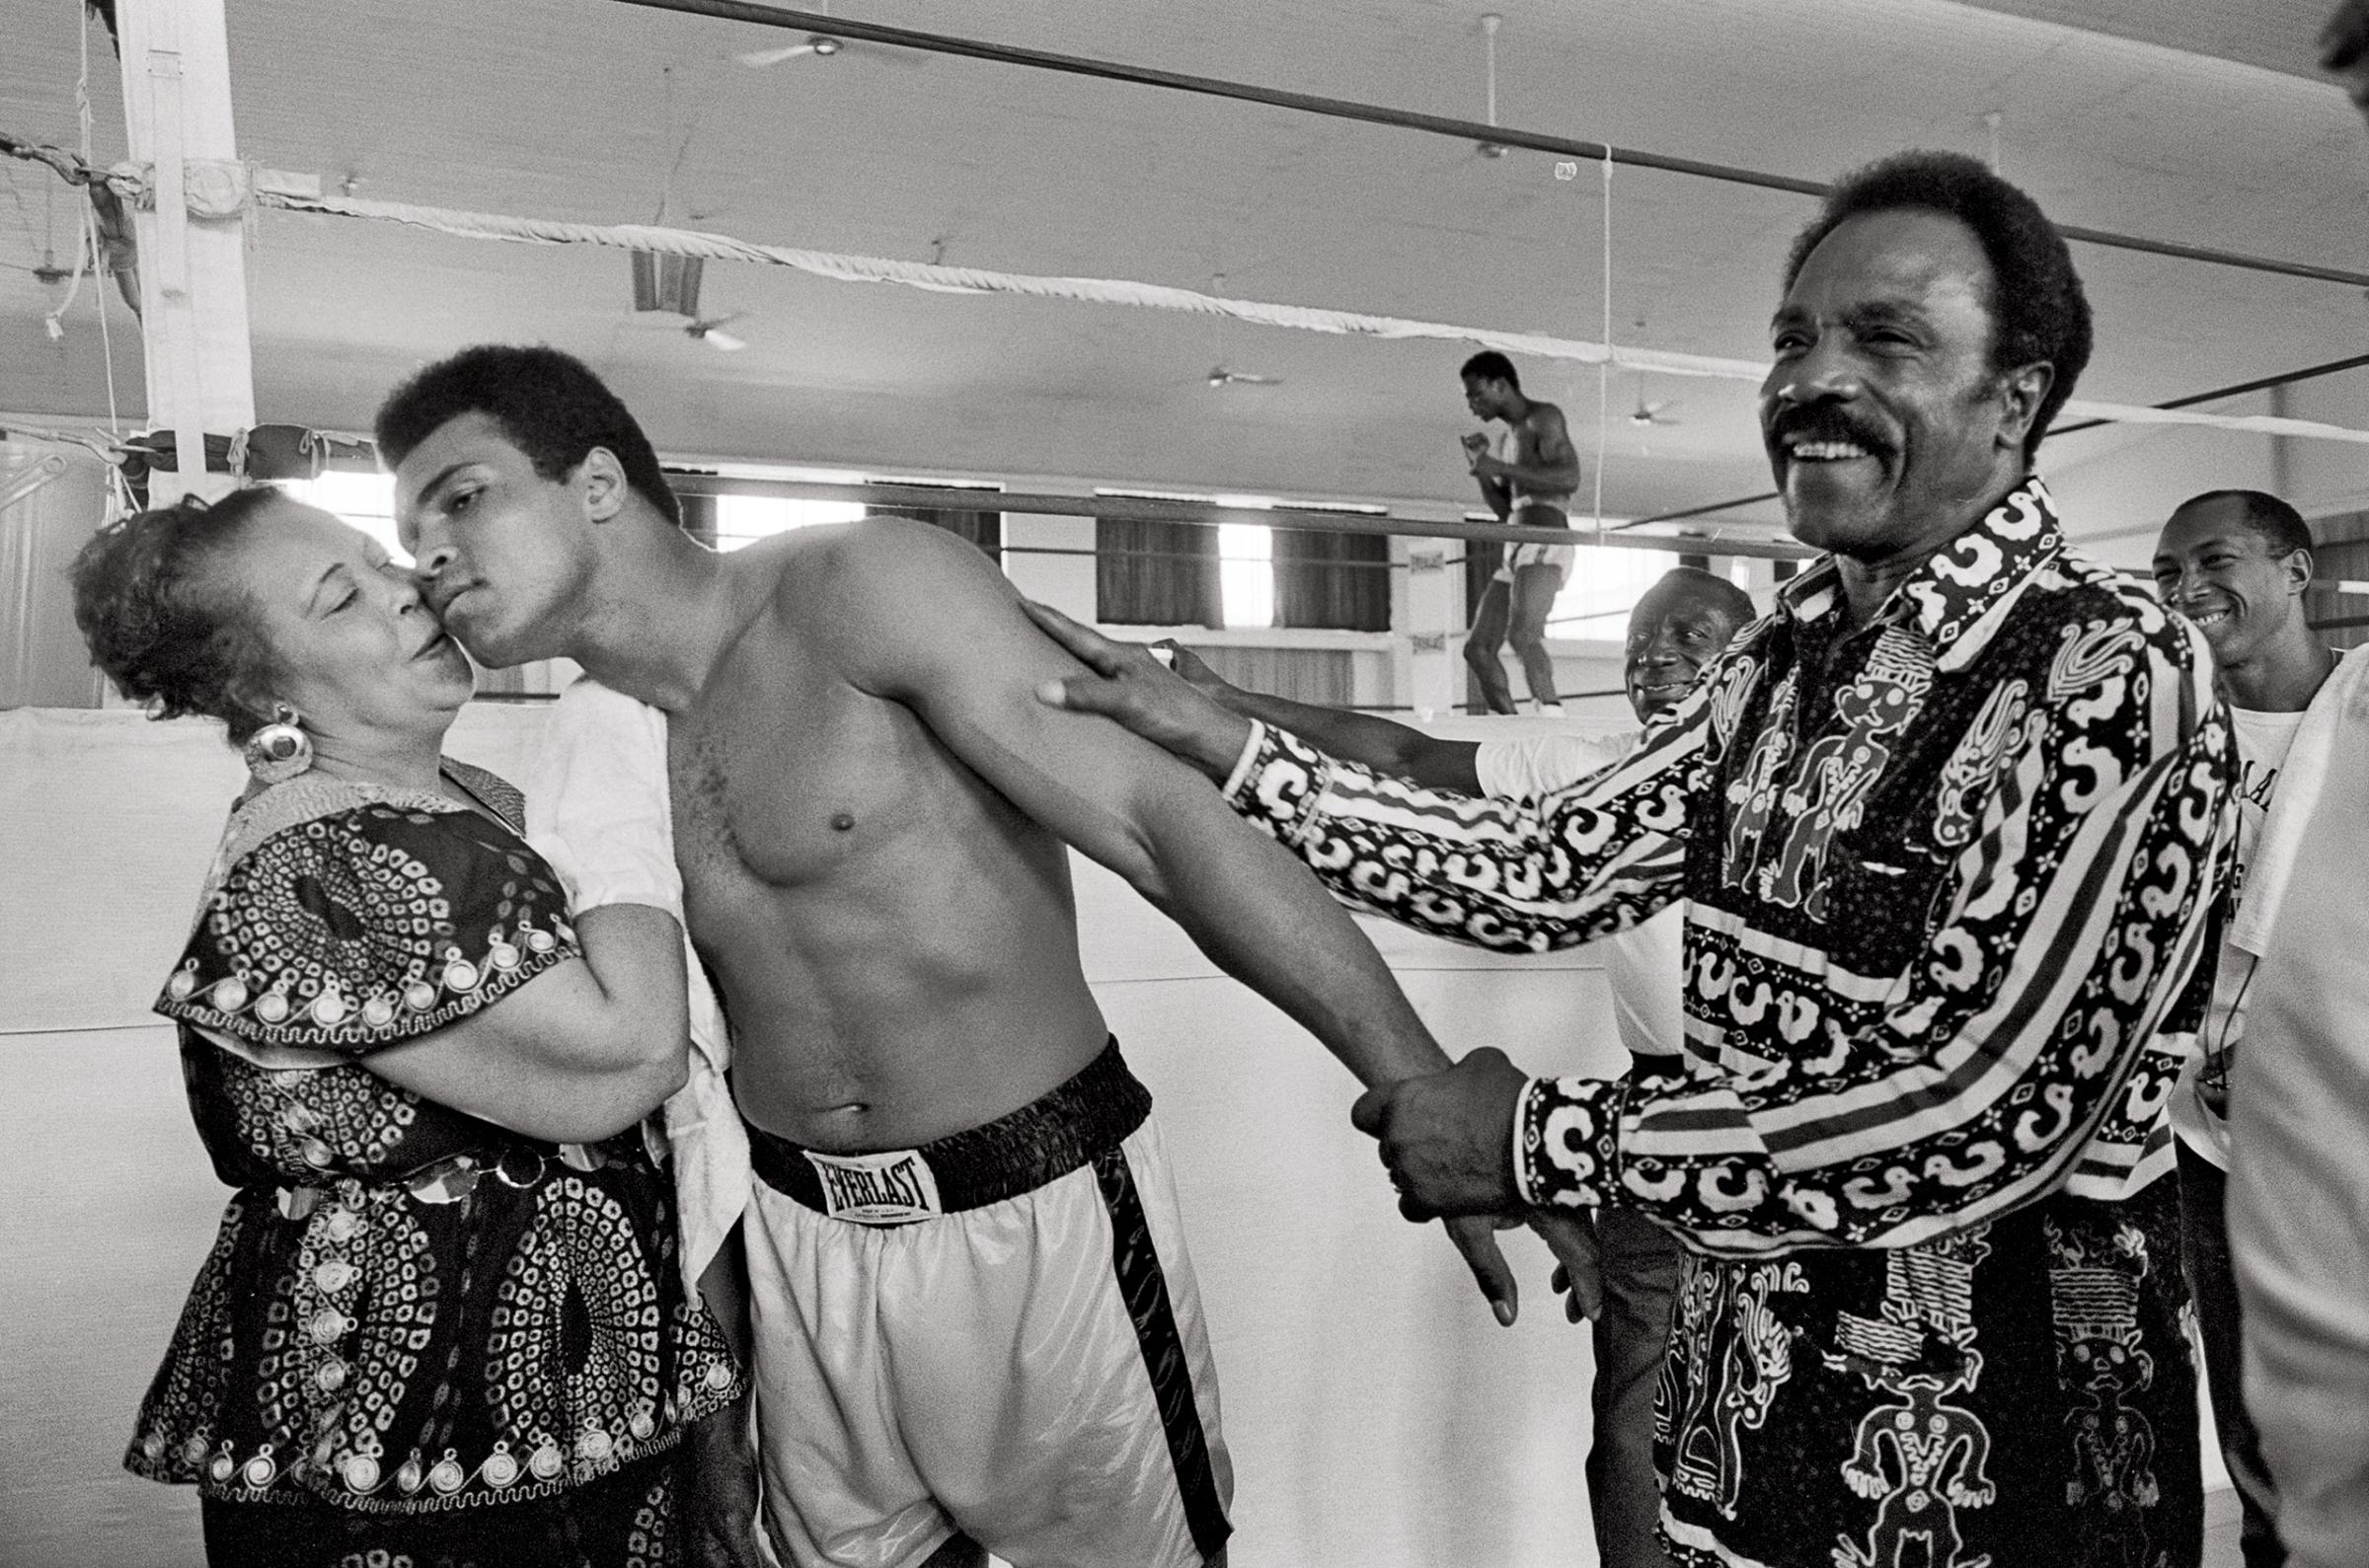 Muhammad Ali and George Foreman in Zaire for The Fight, 1974.